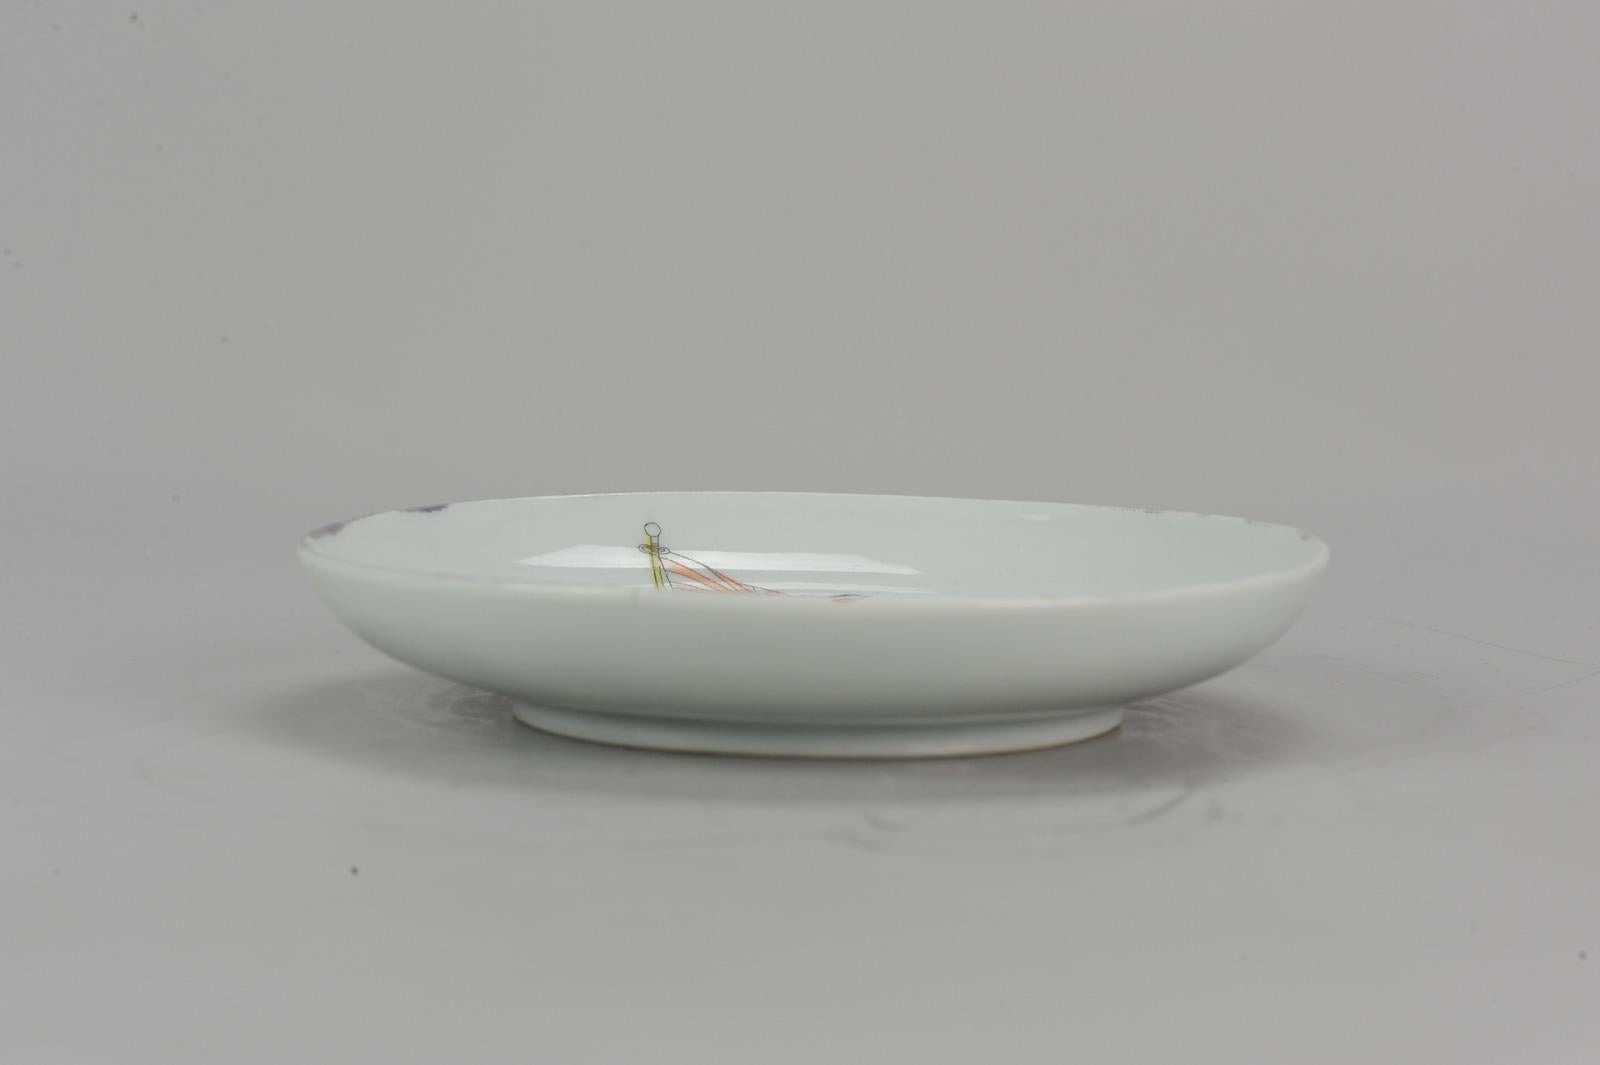 A Rare Porcelain Dish, Arita Kilns.

Additional information:
Material: Porcelain & Pottery
Type: Plates
Region of Origin: Japan
Country of Manufacturing: China
Period: 19th century, 20th century
Age: Pre-1800
Condition: 1 chip and a baking flaw.